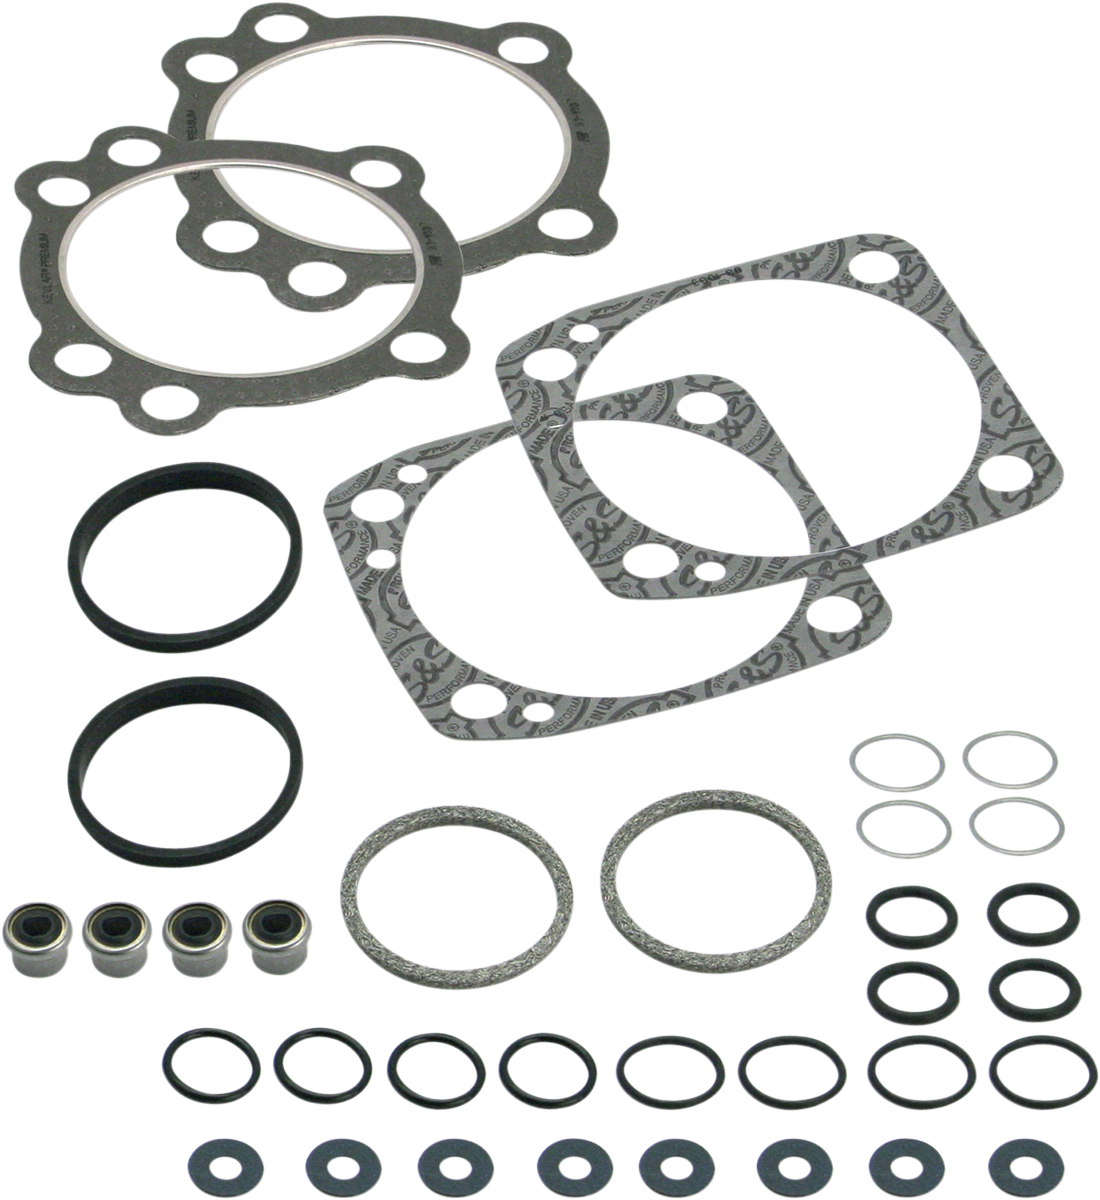 S&S Cycle 3-5/8" Top End Gasket Kit fits 1984-1999 Harley Big Twin Evo Models